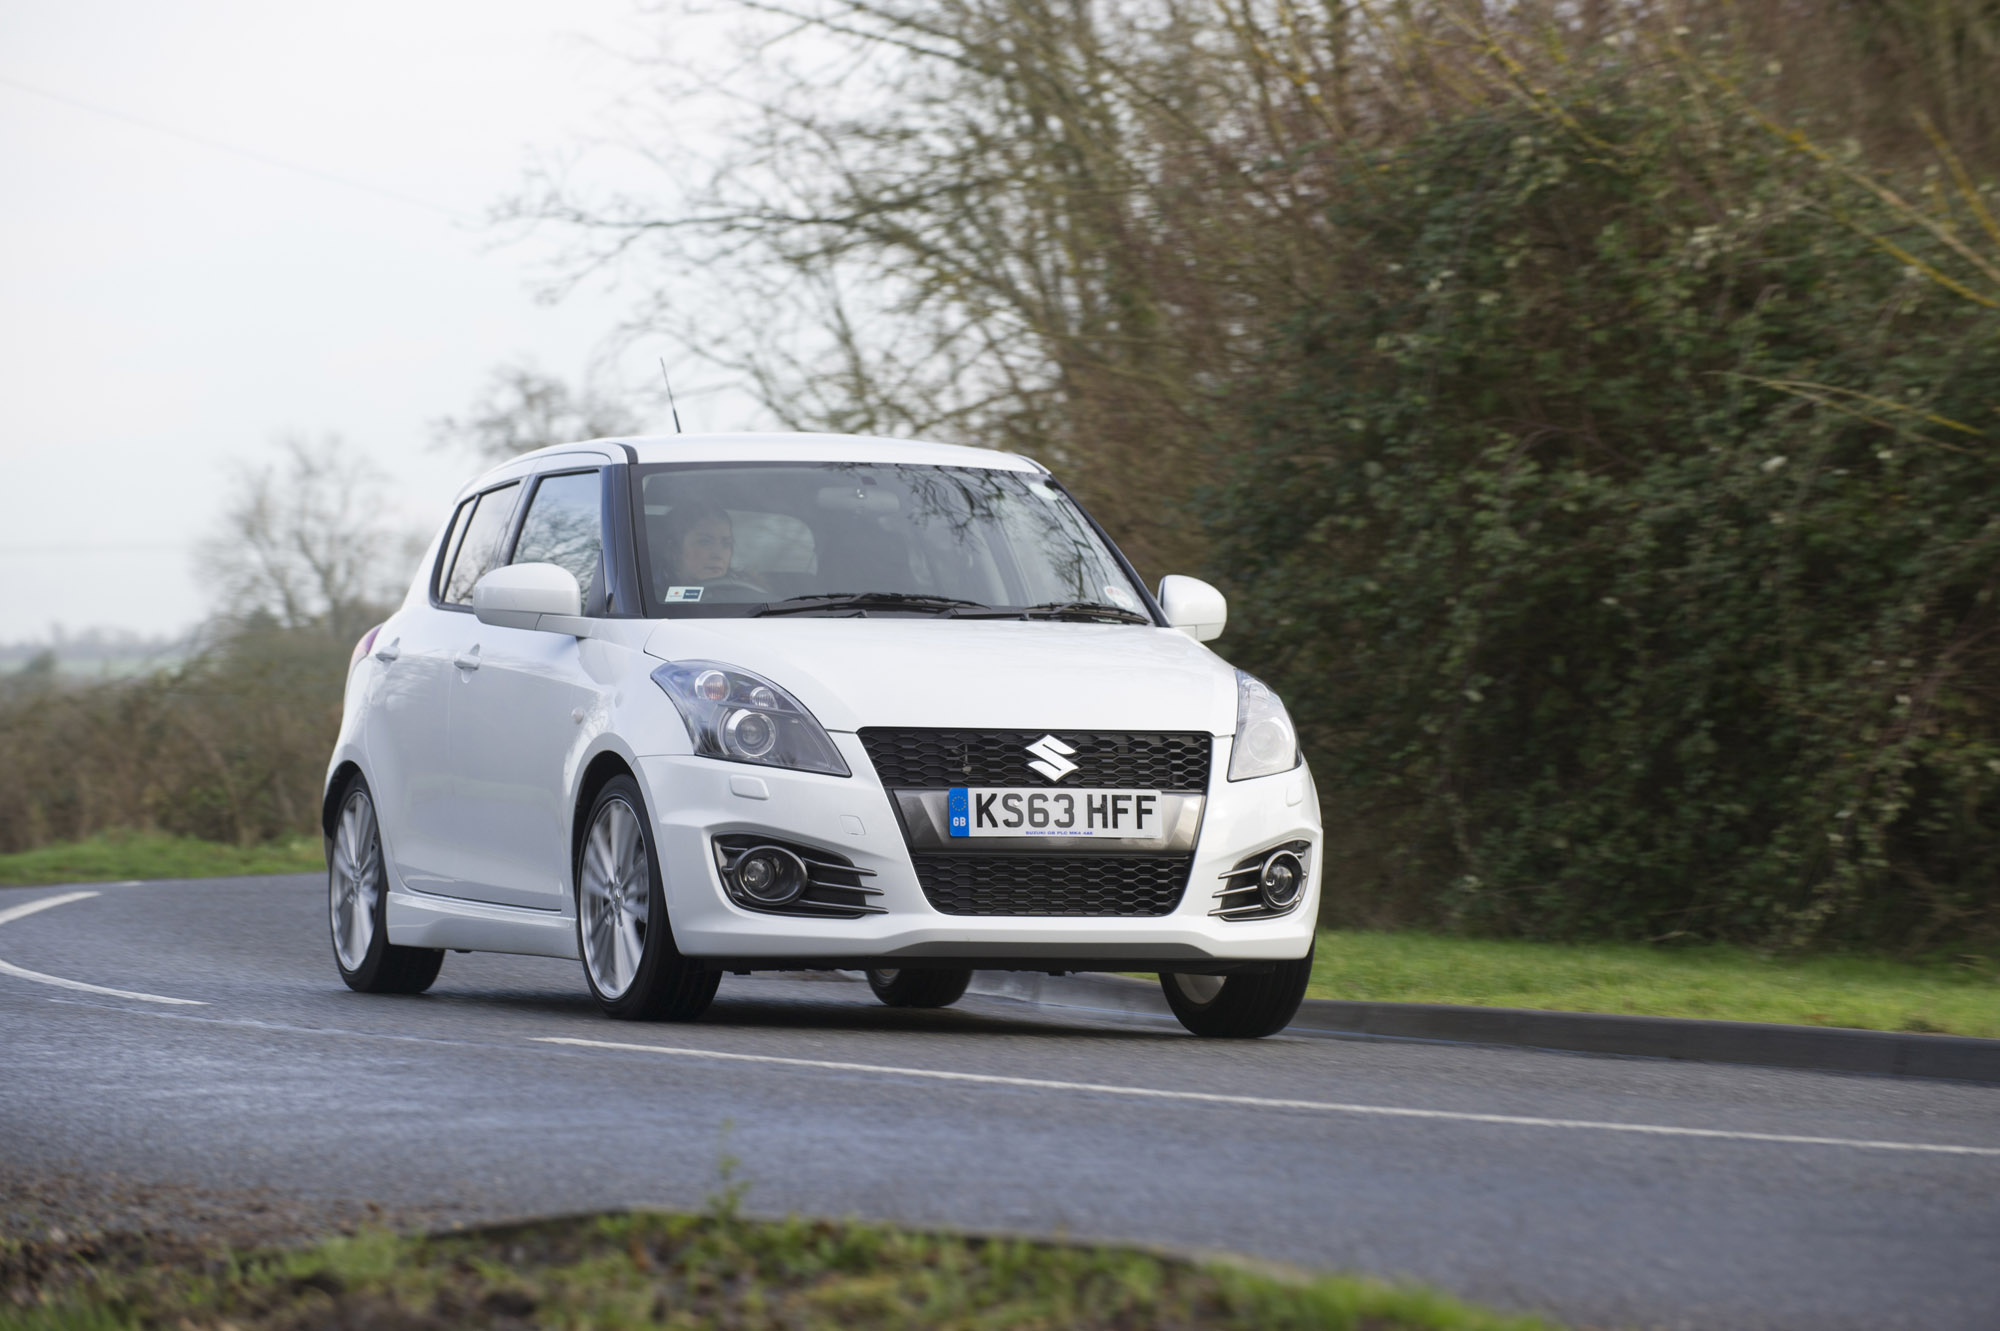 Suzuki Swift Sport review - prices, specs and 0-60 time